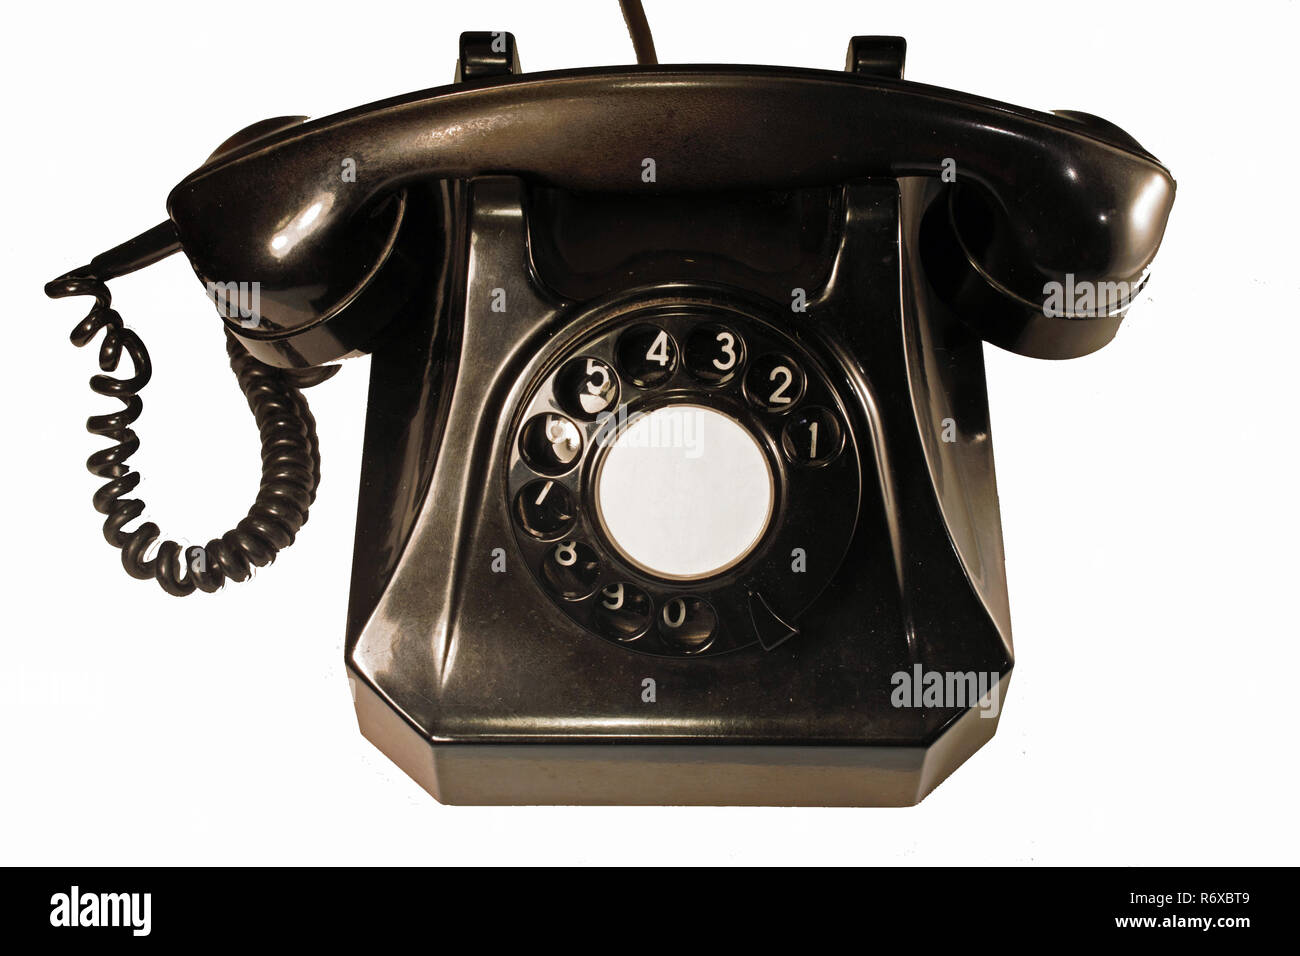 This kind of bakelite telephone was produced in the 1955 in Switzerland. It has a classical dial. Isolated on white background. Stock Photo